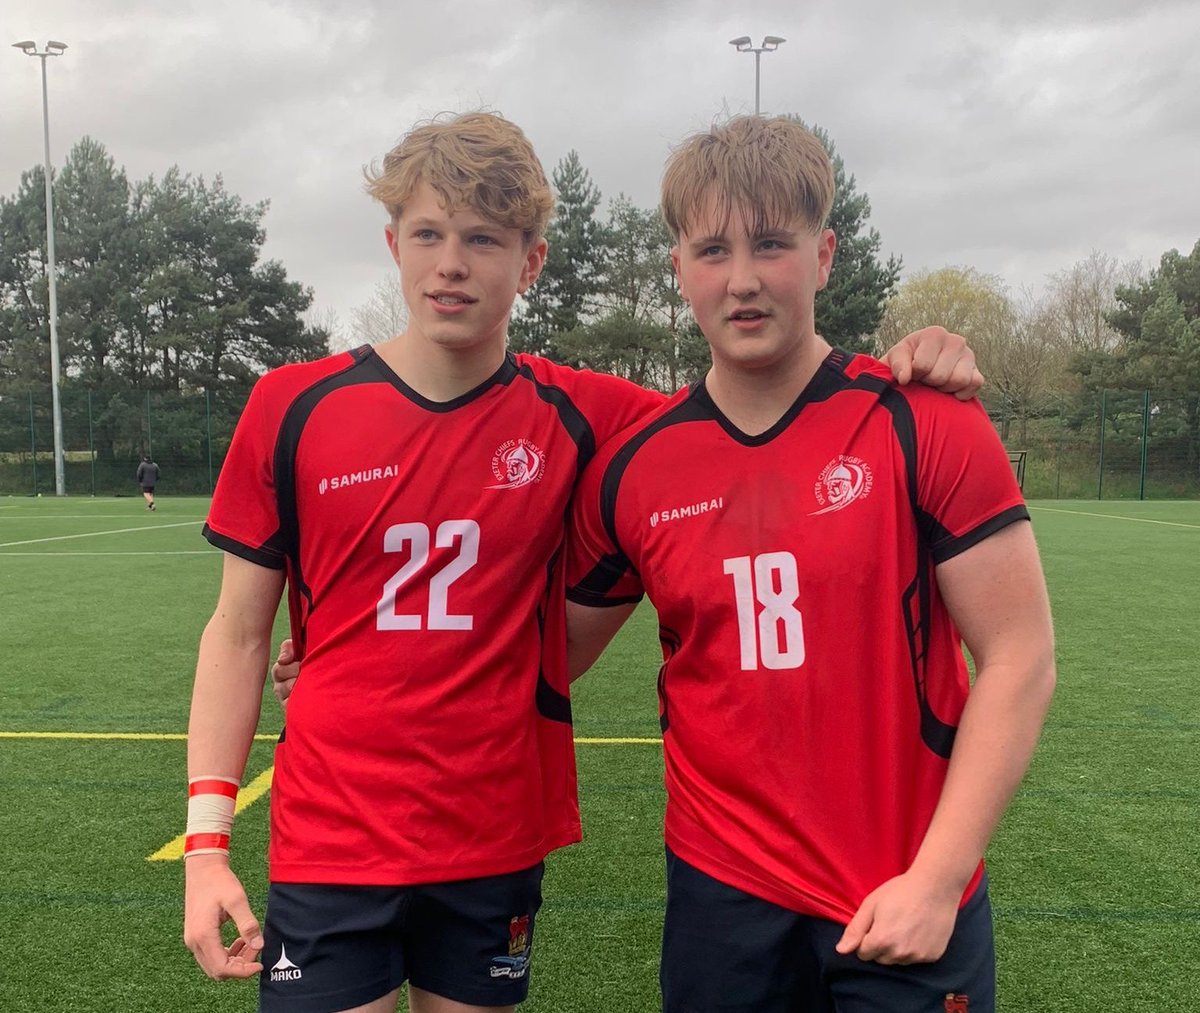 Congratulations to Elliott and Joshua who represented the U16s @ExeterChiefs Academy team in the RFU festival at Warwick School. The festival gives the best U16 rugby players in England the opportunity to showcase their talents. #itstheclimb